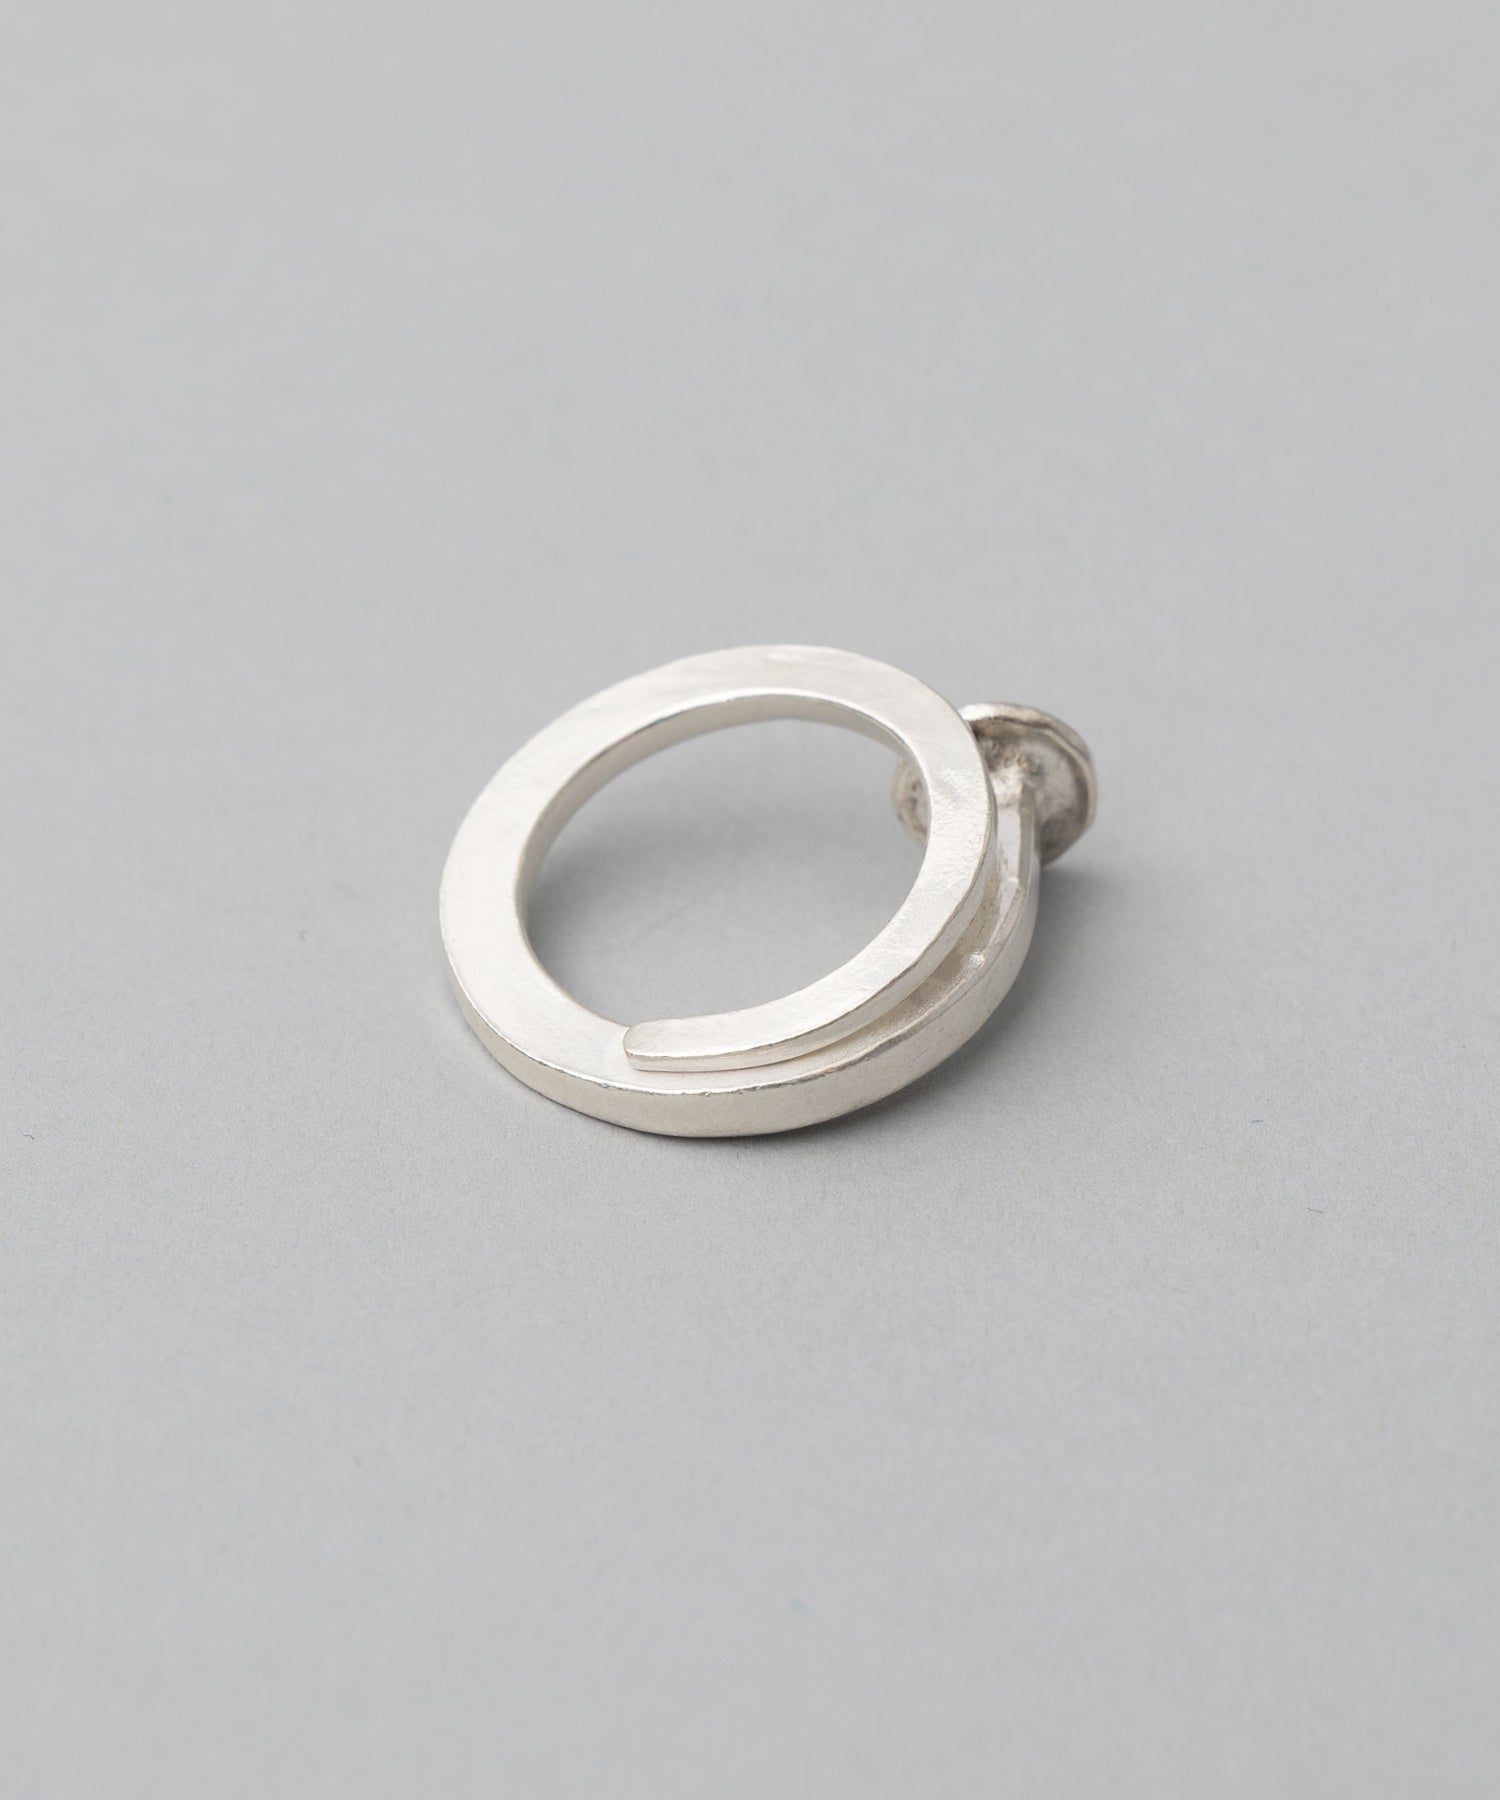 【Mountain People x MAISON SPECIAL】Ring8